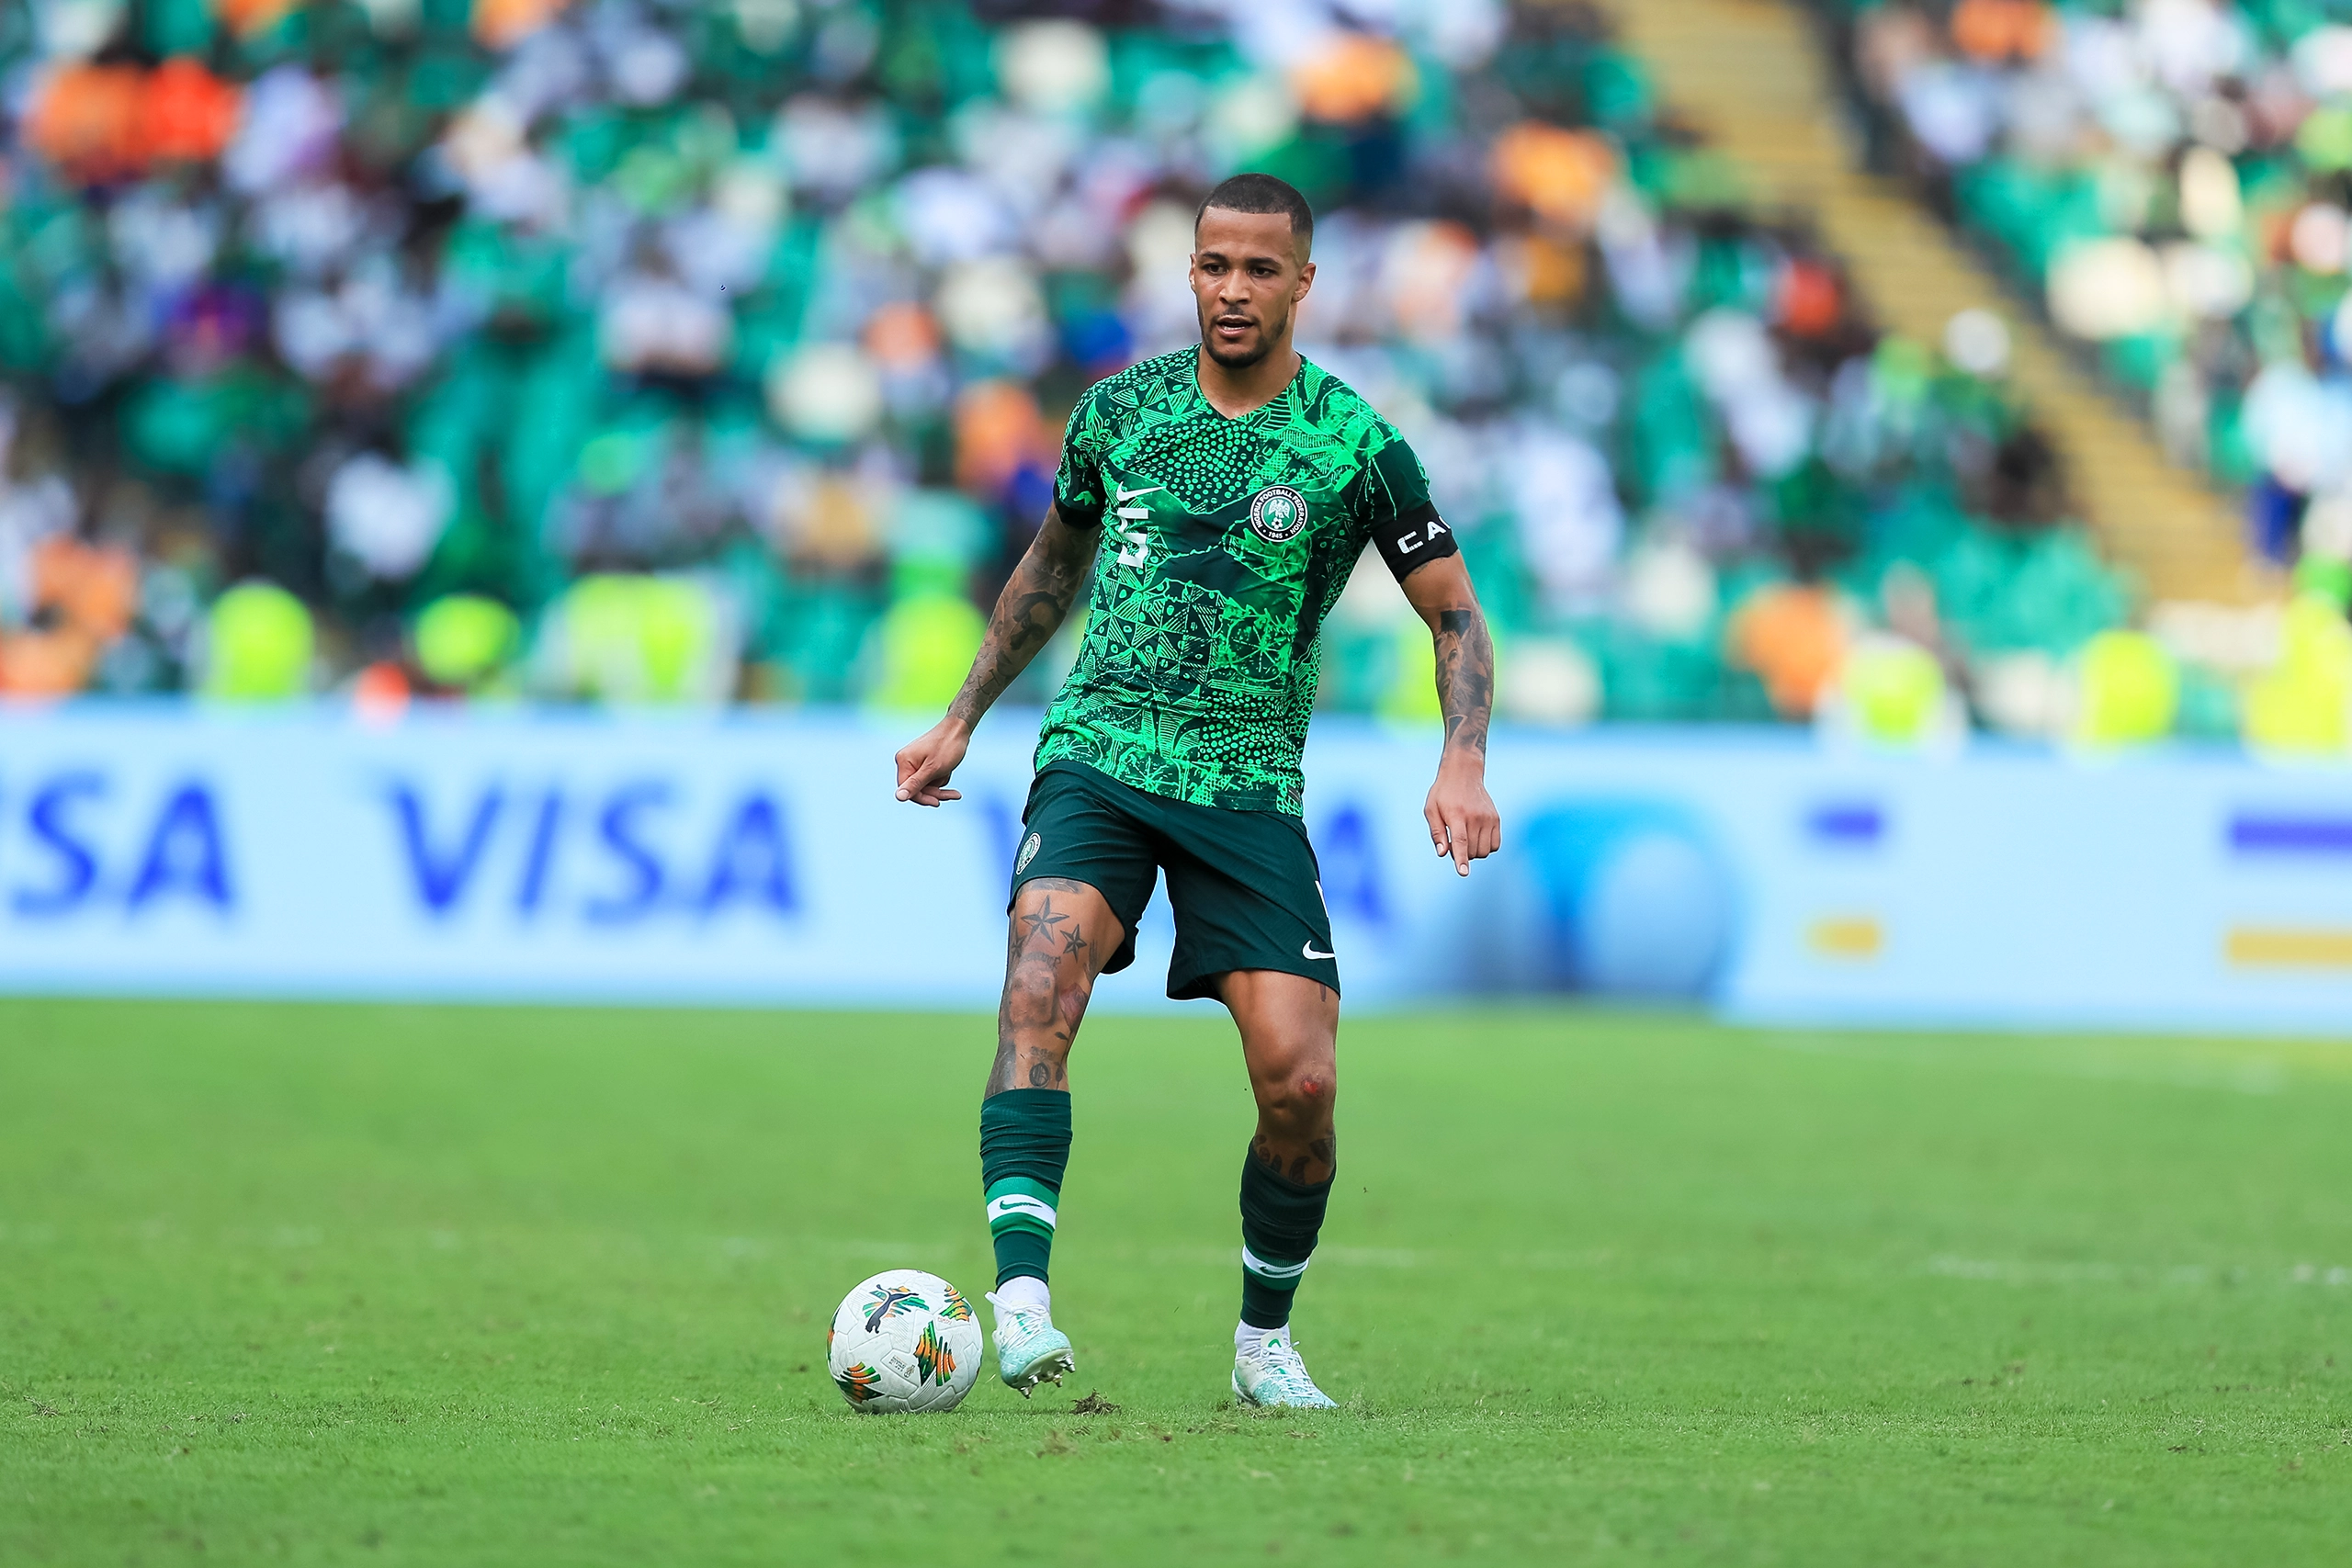 William Troost-Ekong playing in his green Nigeria kit in the first game of the African Cup of Nations